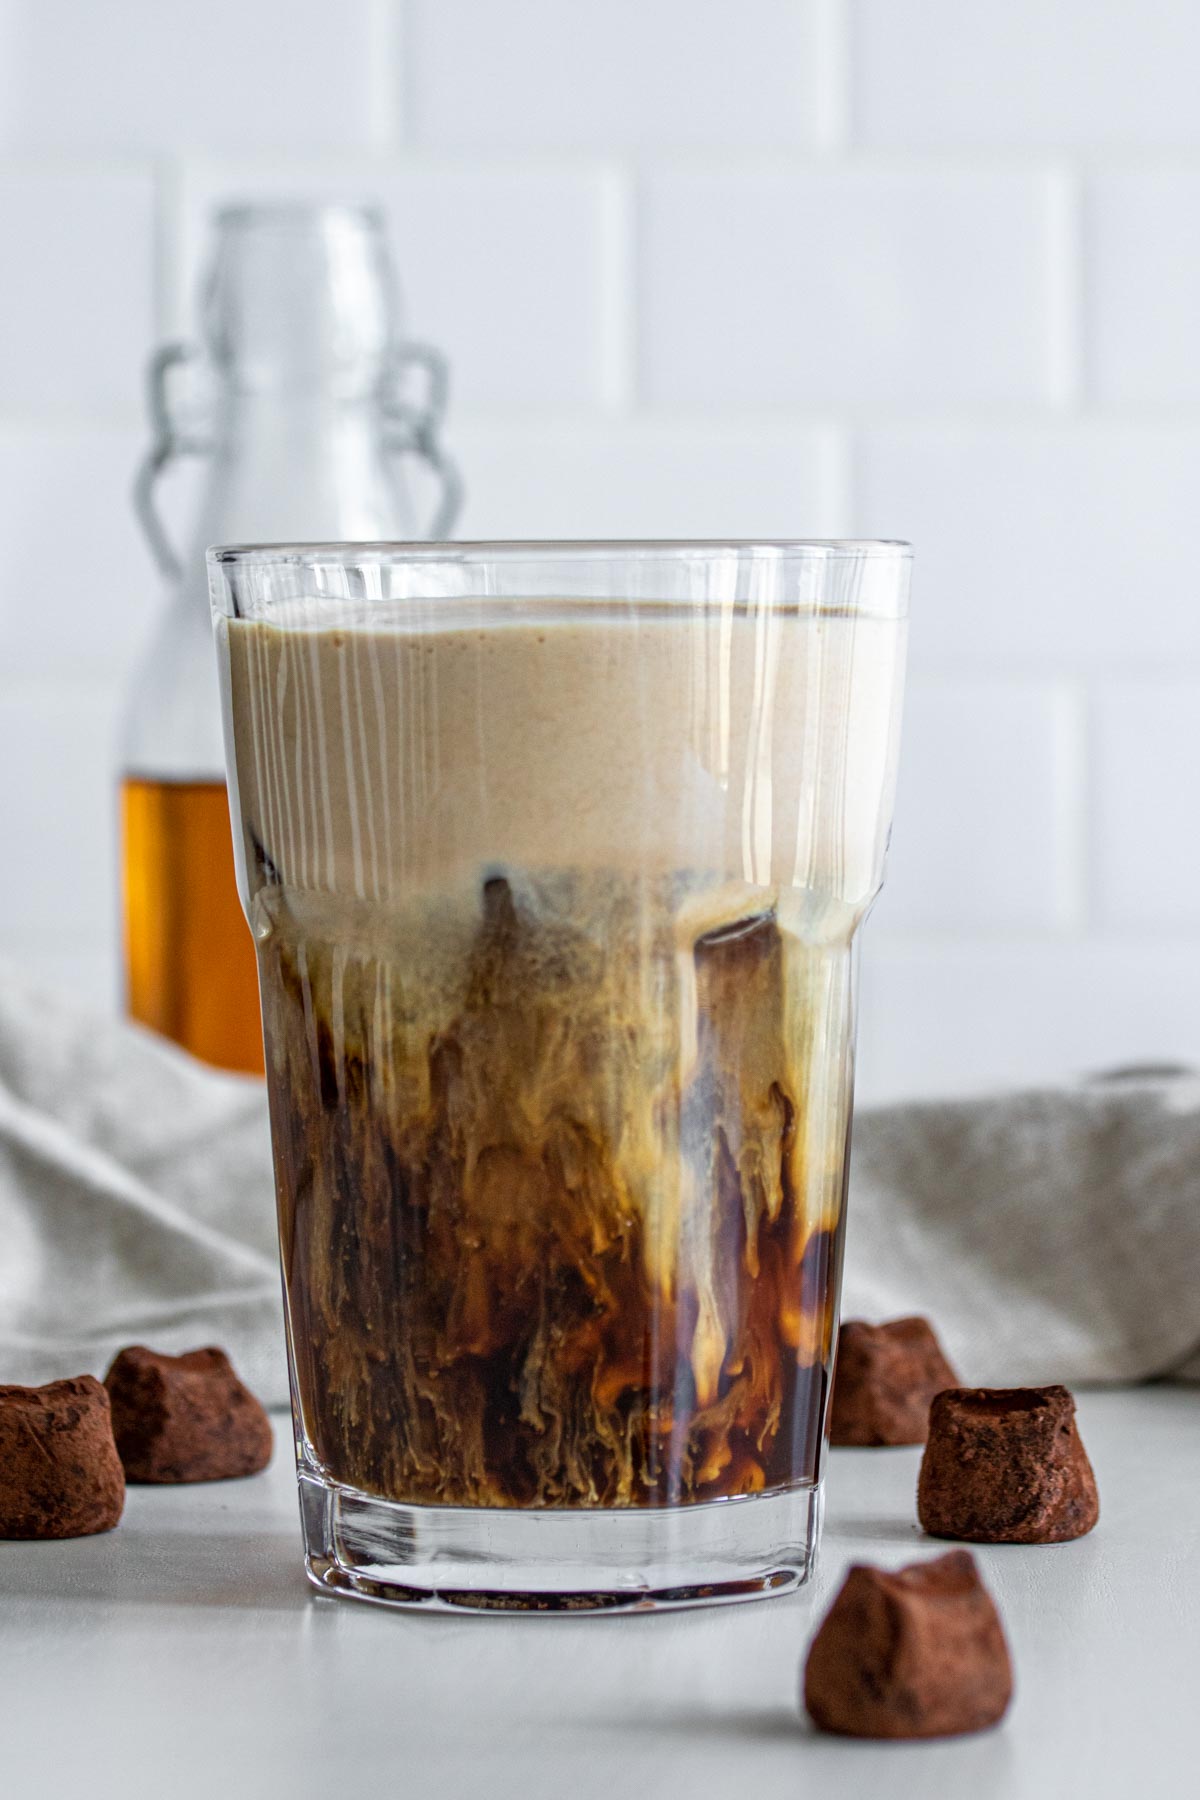 Chocolate Coffee Beverage in a glass, with chocolate truffles around.